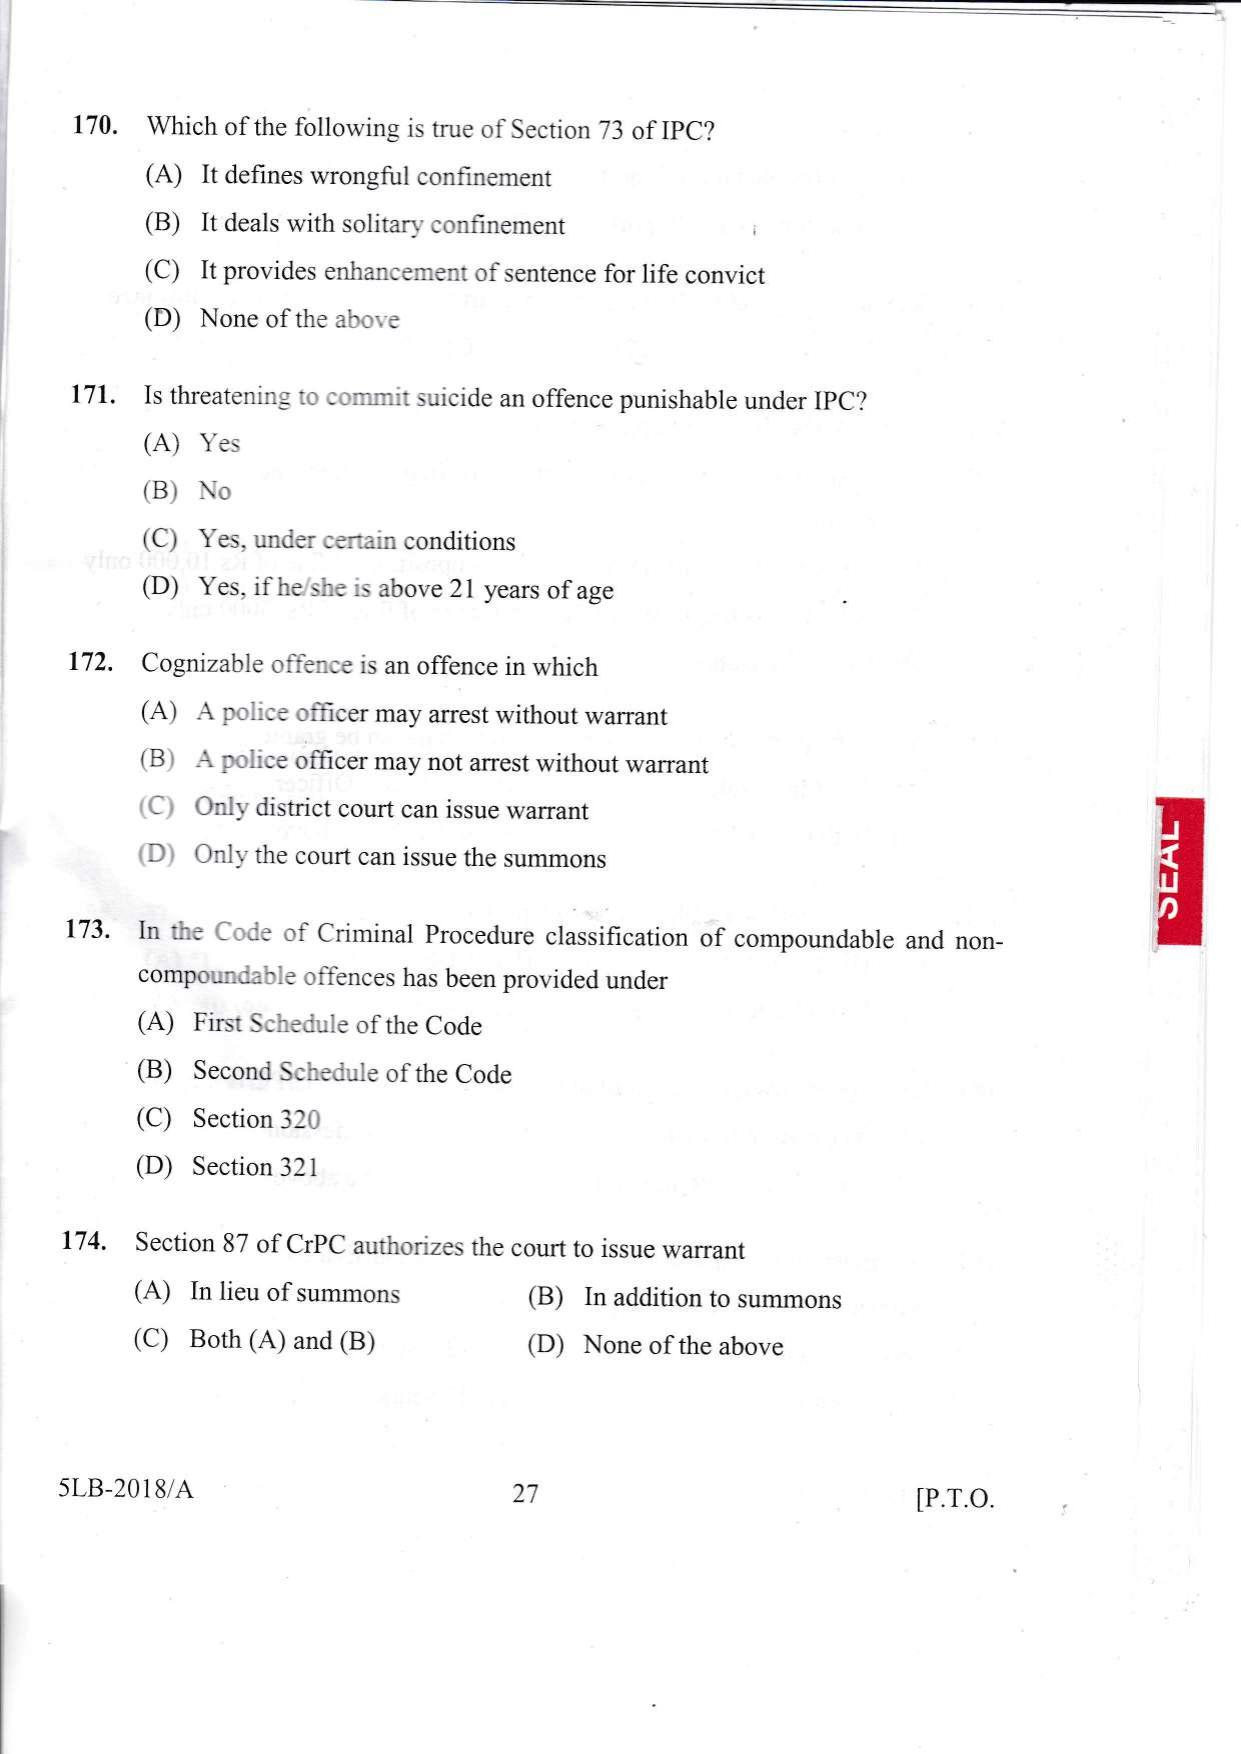 KLEE 5 Year LLB Exam 2018 Question Paper - Page 27